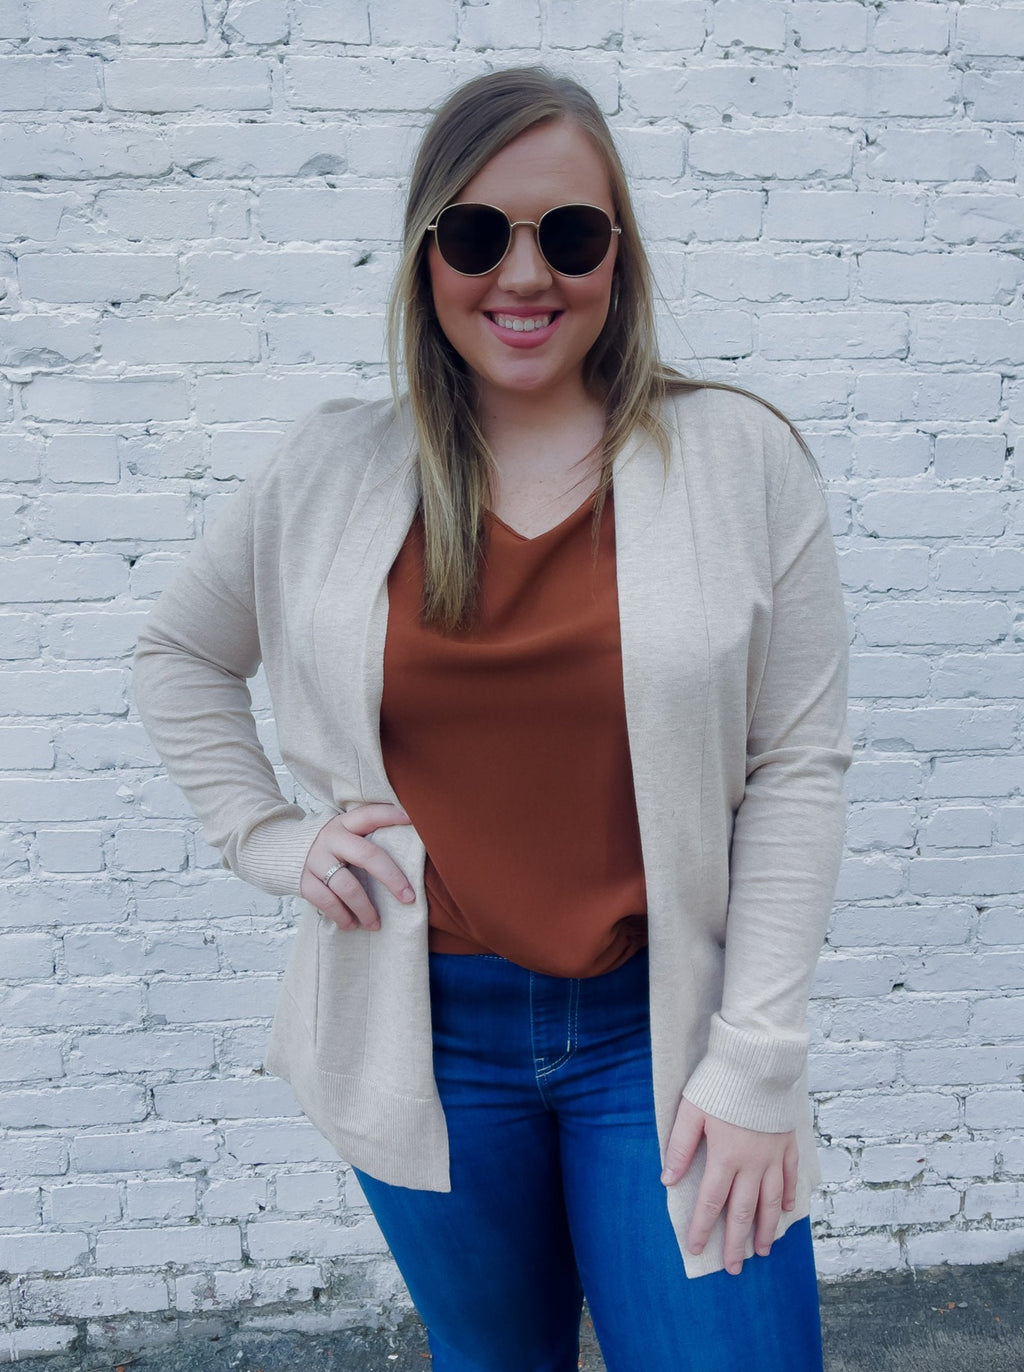 Cardigans feature a solid base color, soft material ,long sleeves, open front detail and runs true to size! -oatmeal